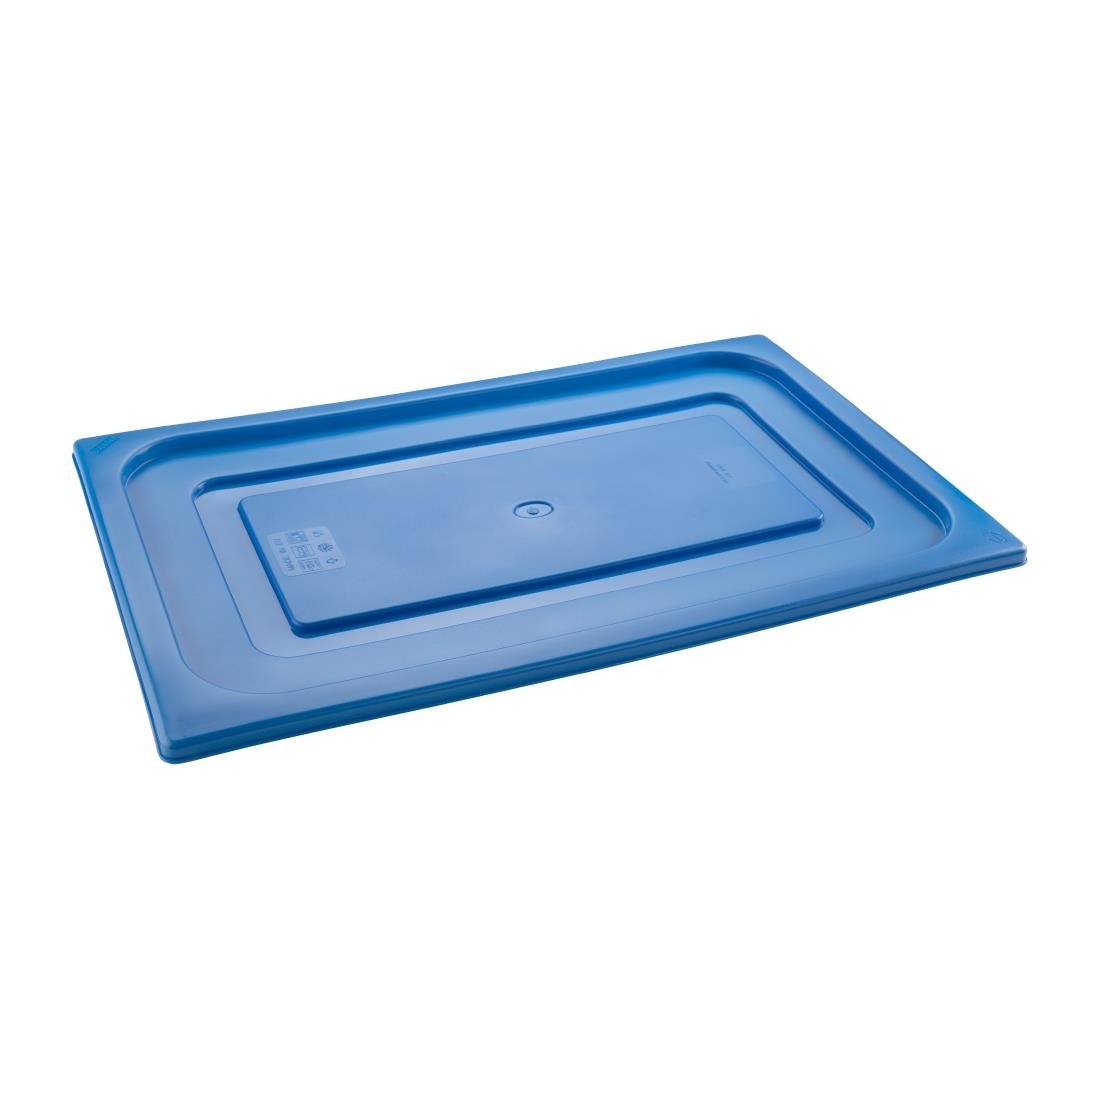 HT896 Pujadas Blue Polinorm Gastronorm Lid 1/3GN